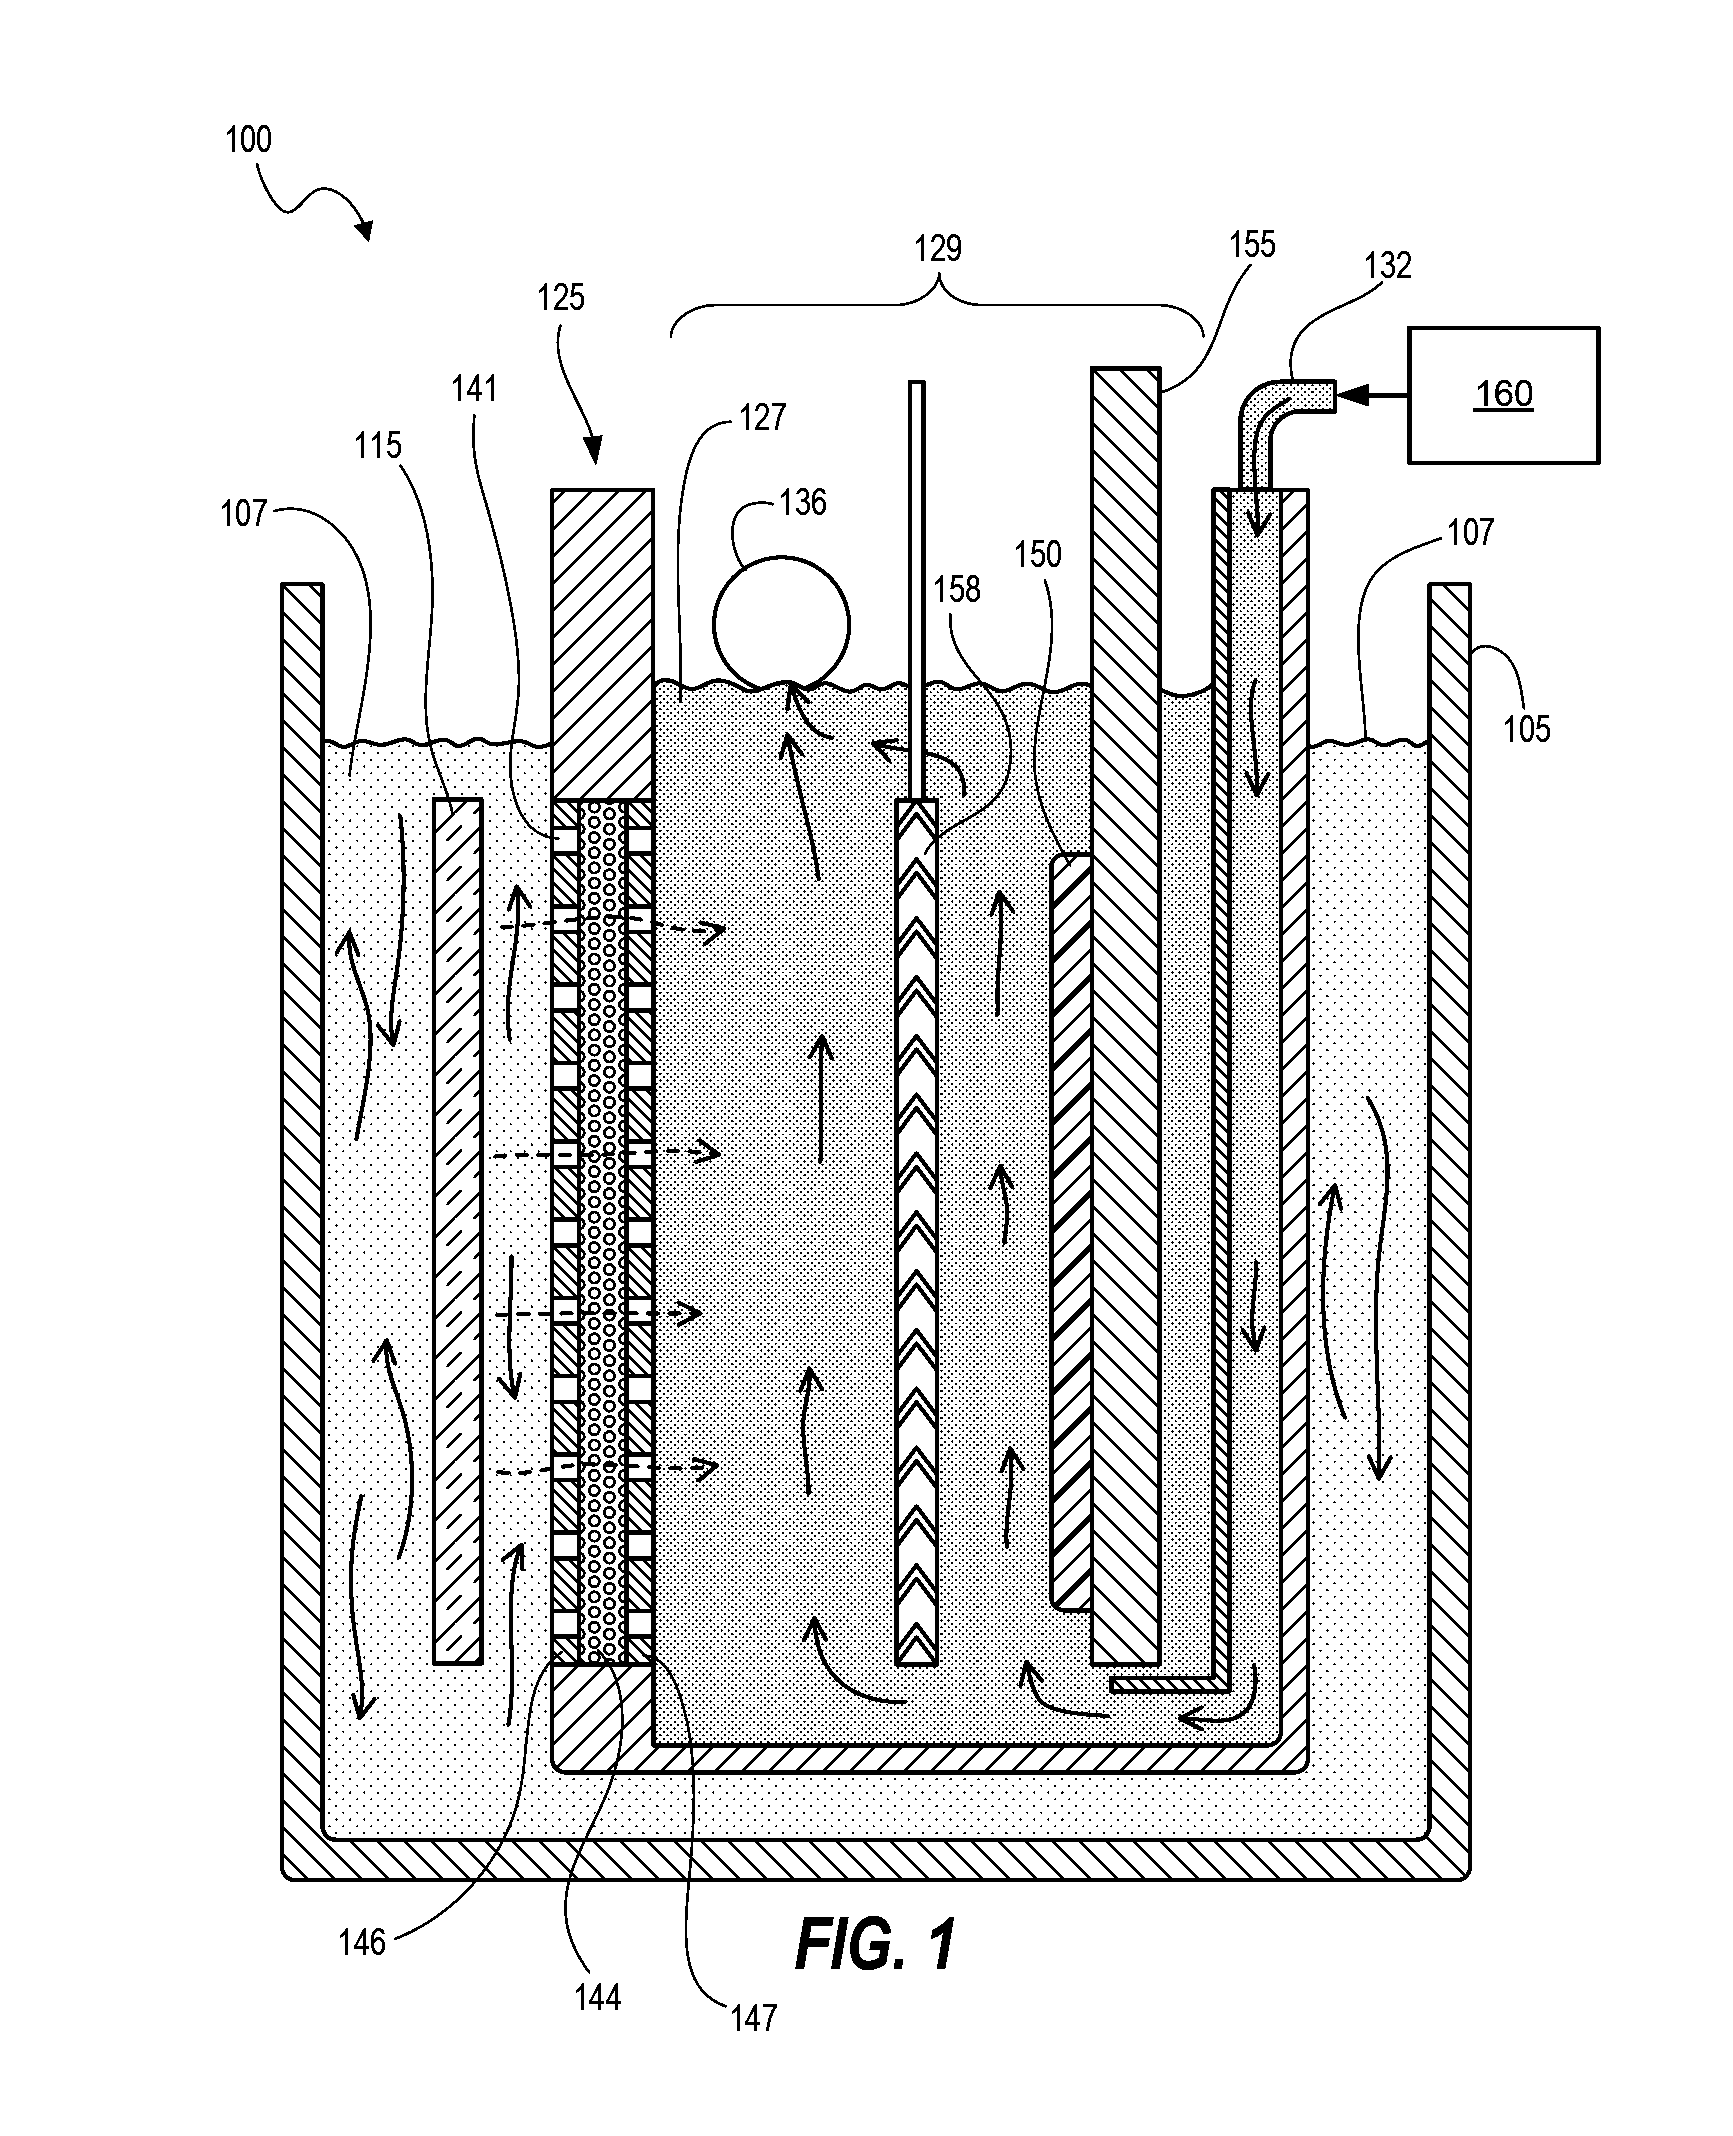 Electrochemical deposition apparatus with remote catholyte fluid management